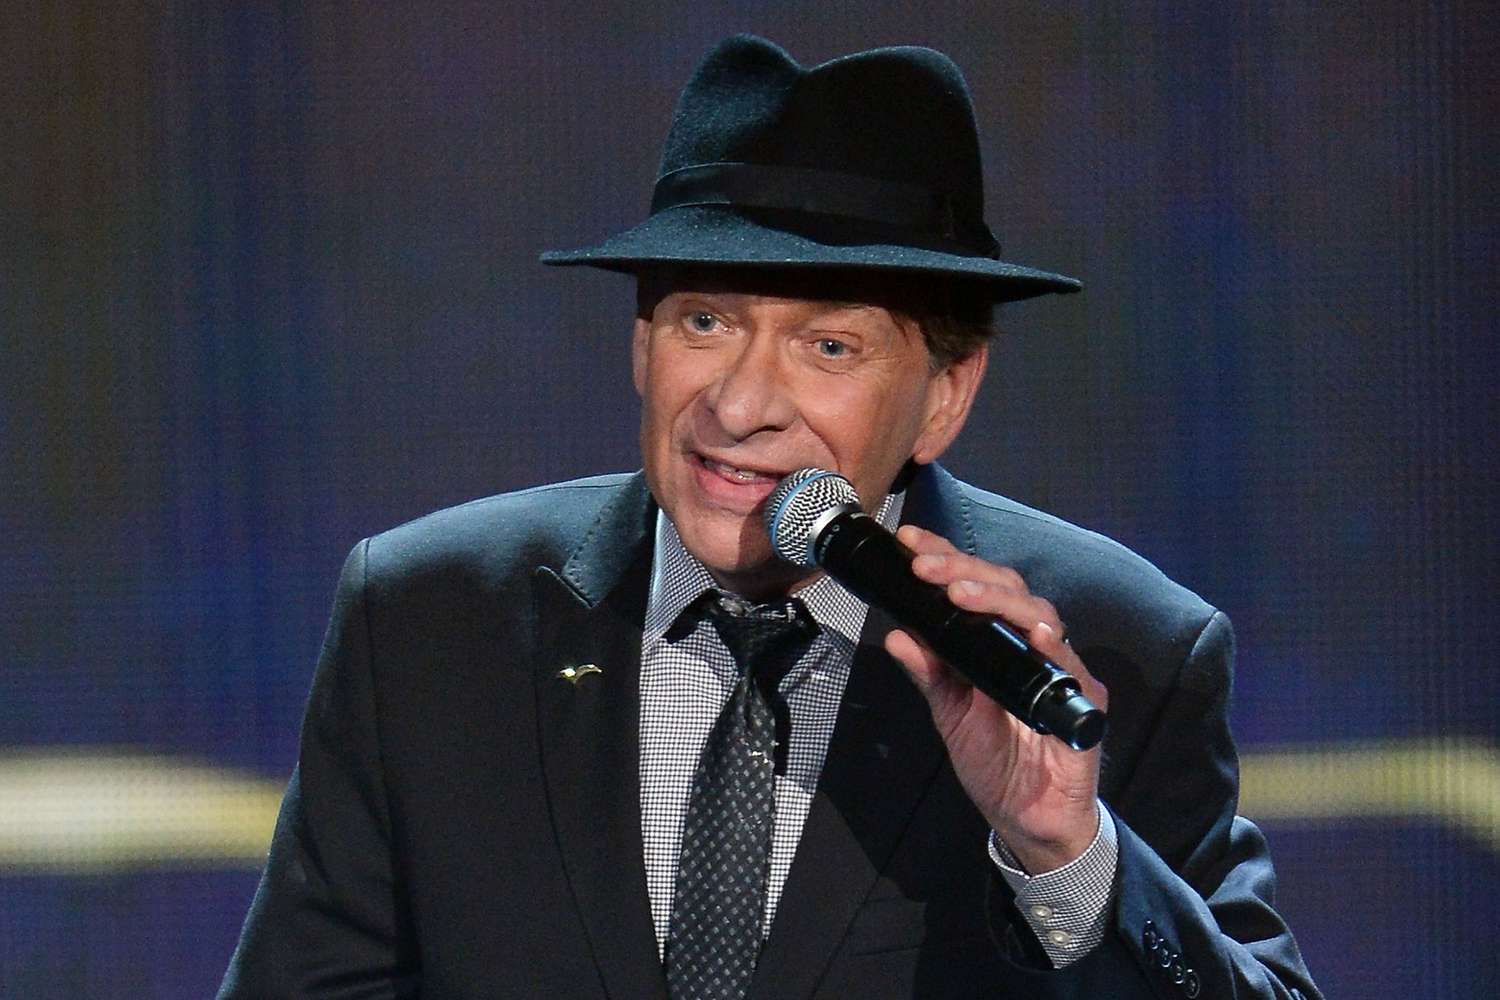 Bobby Caldwell performs during the Soul Train Awards 2013 at the Orleans Arena on November 8, 2013 in Las Vegas, Nevada.